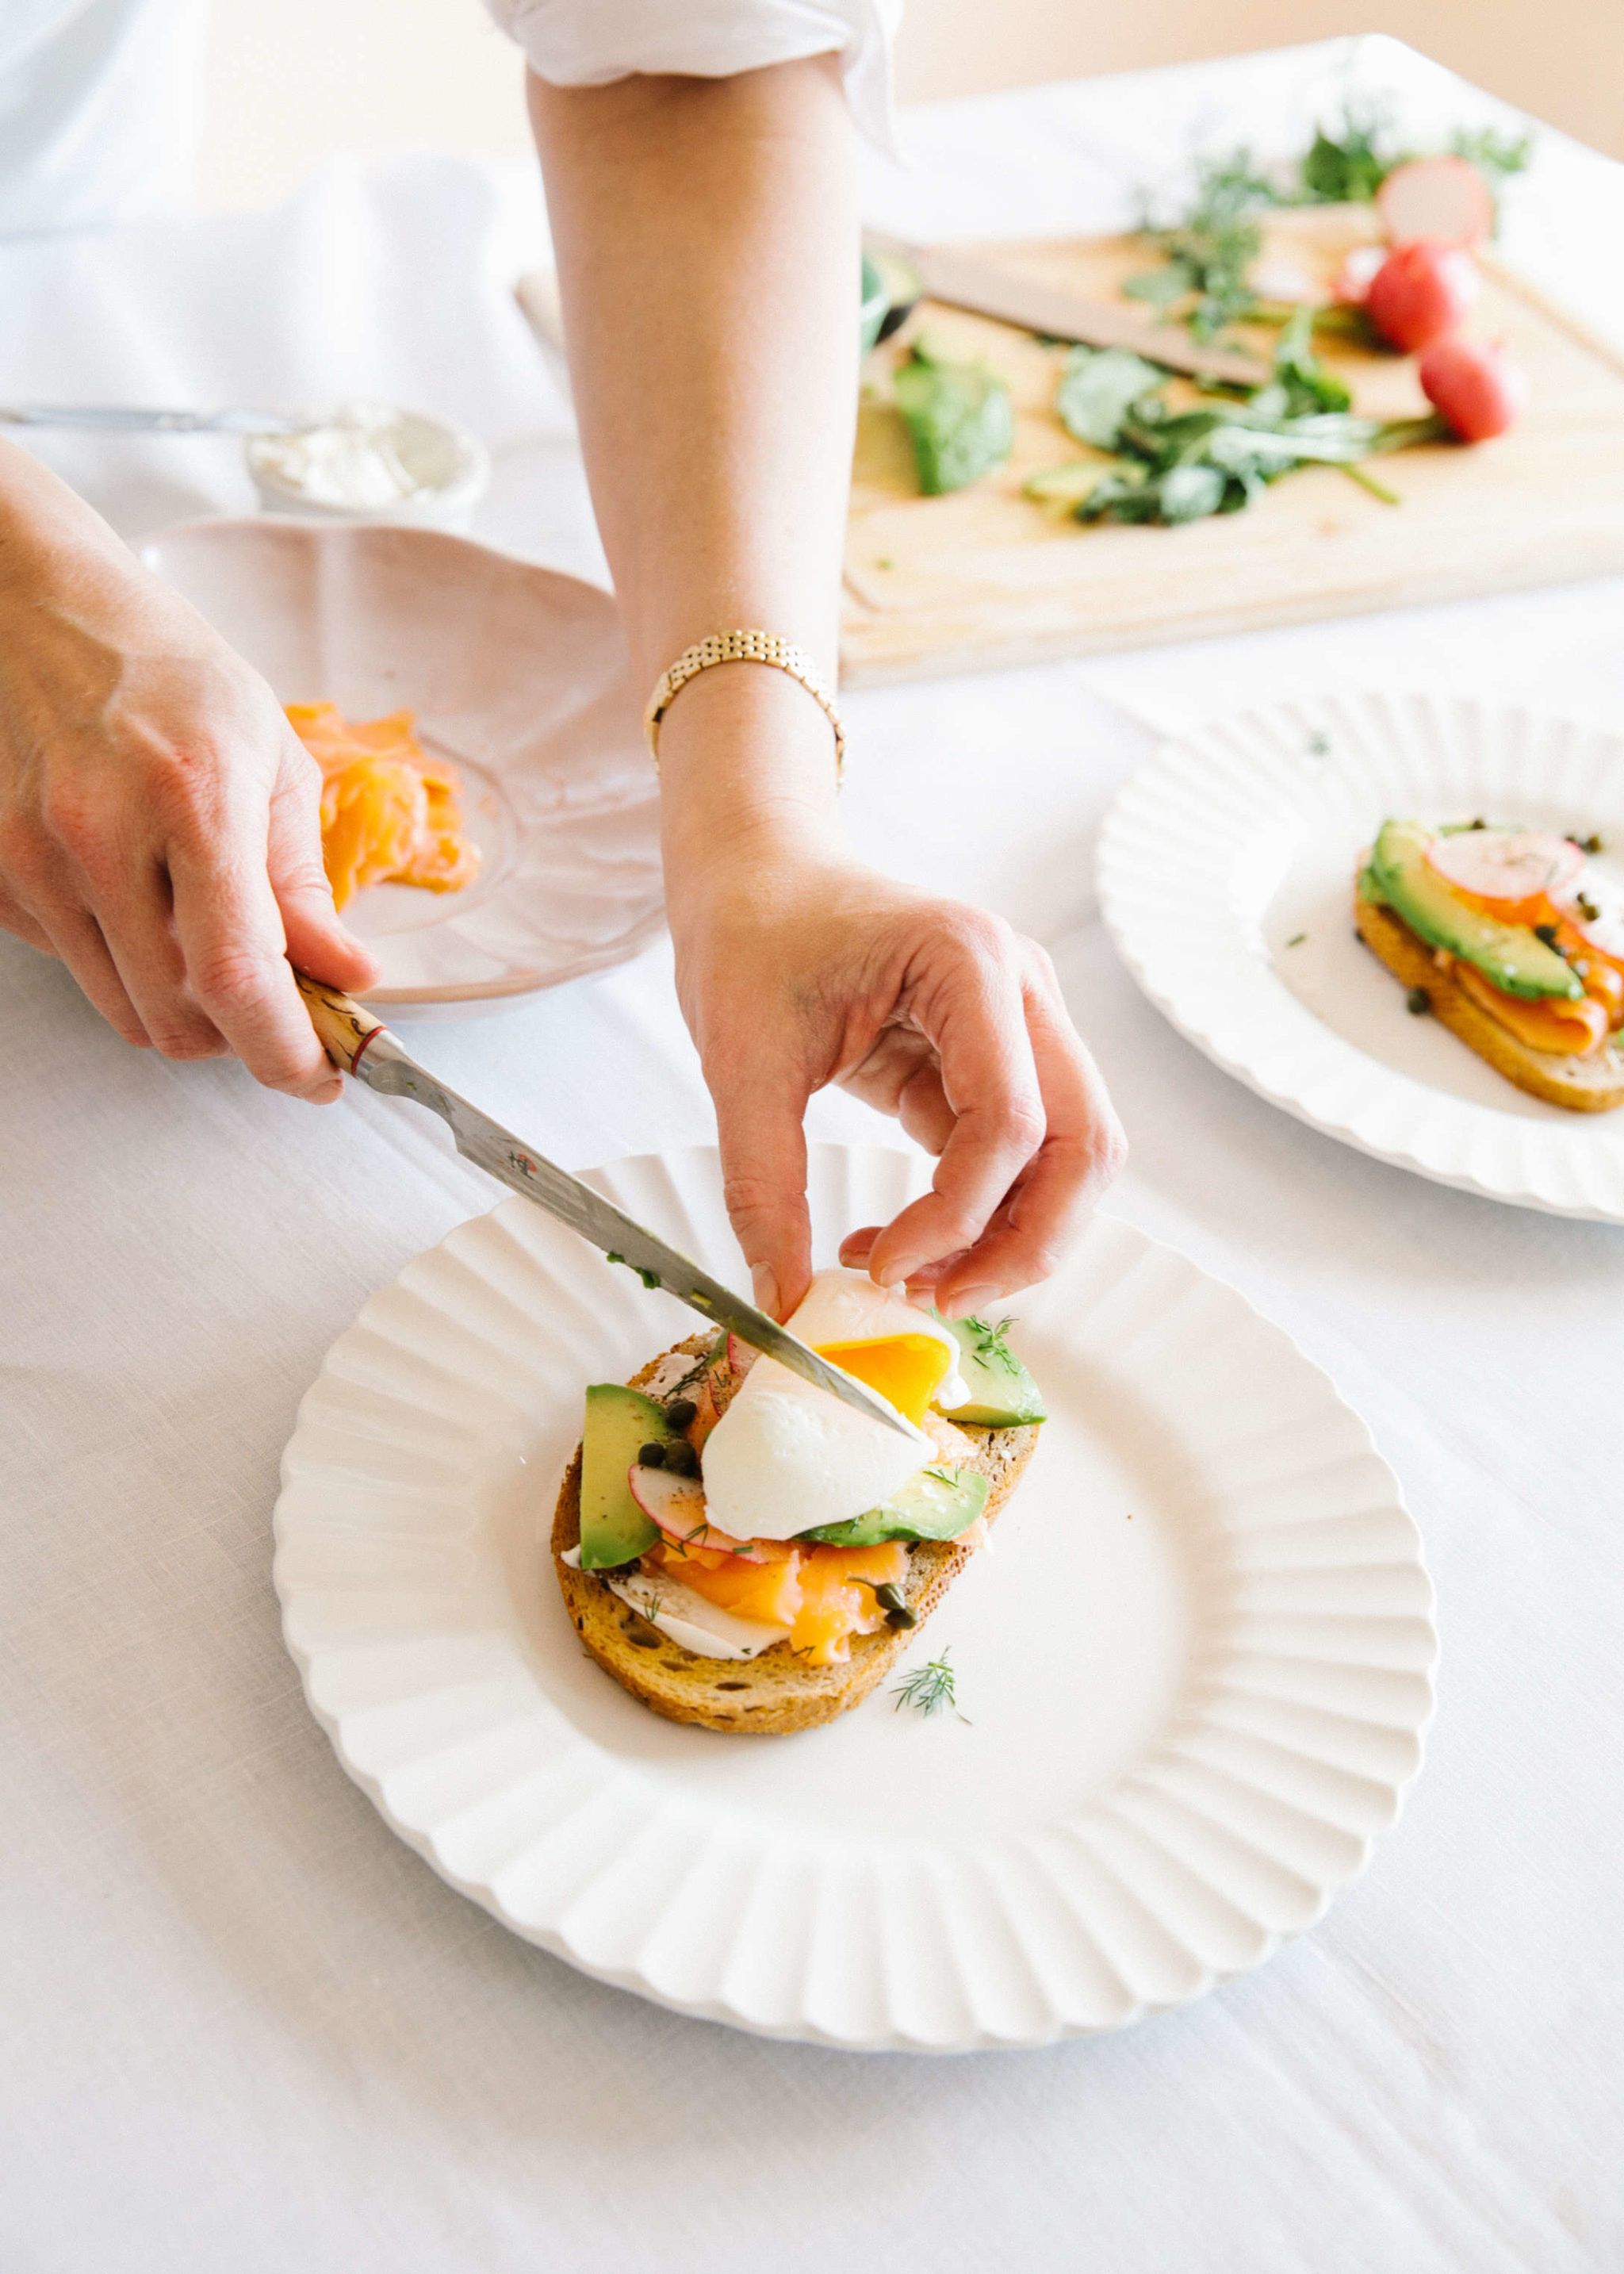 chef slicing into poached egg on top of tartine of salmon, avocado, and radishes on white plate with cutting board in background